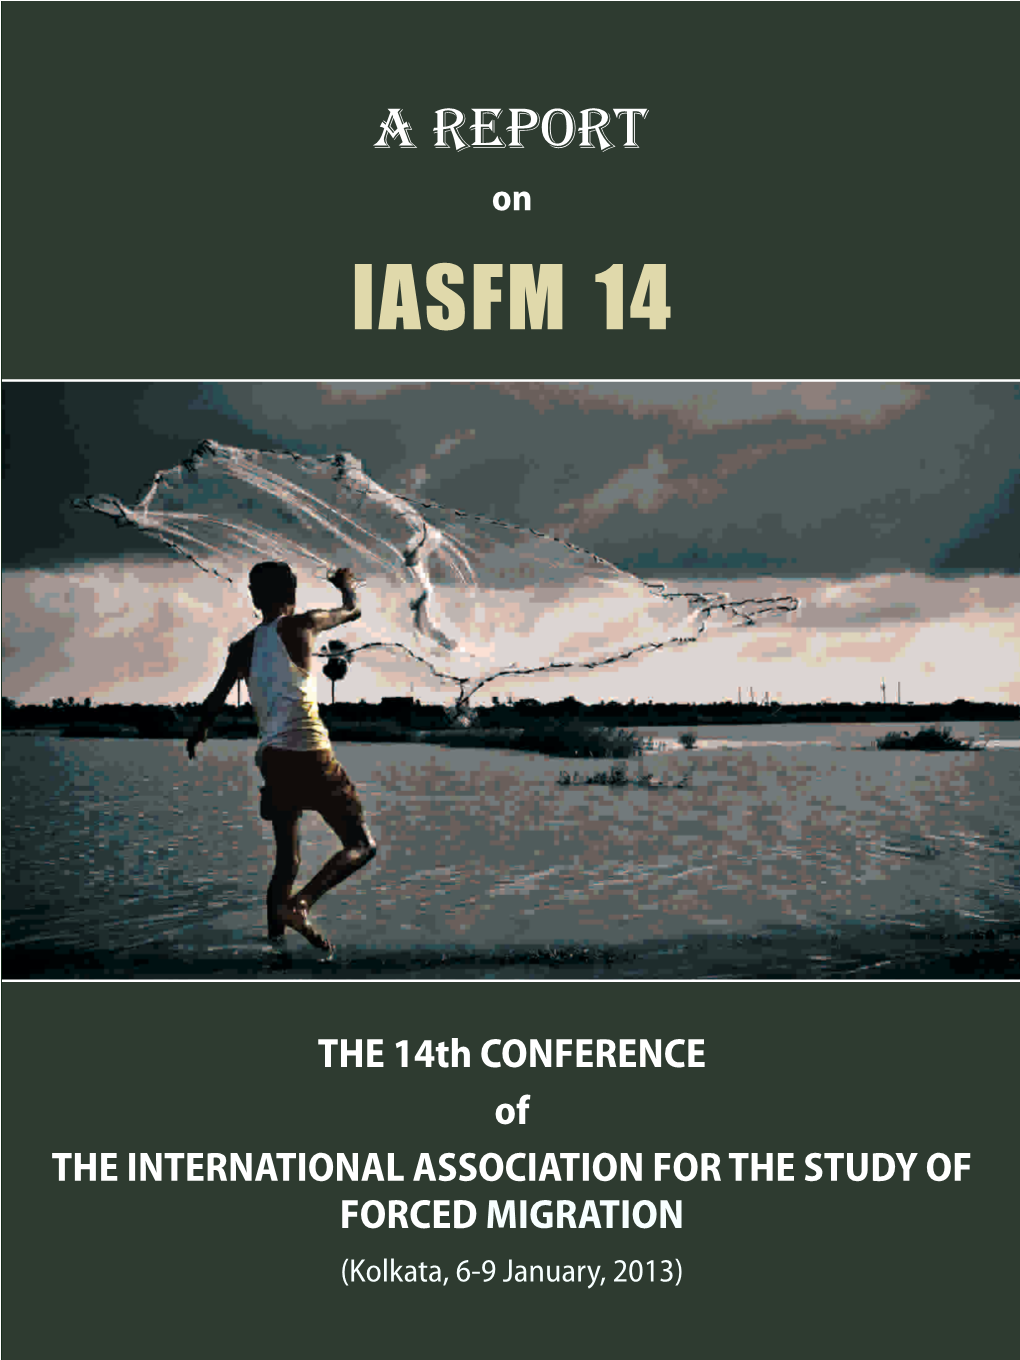 A Report on IASFM 14